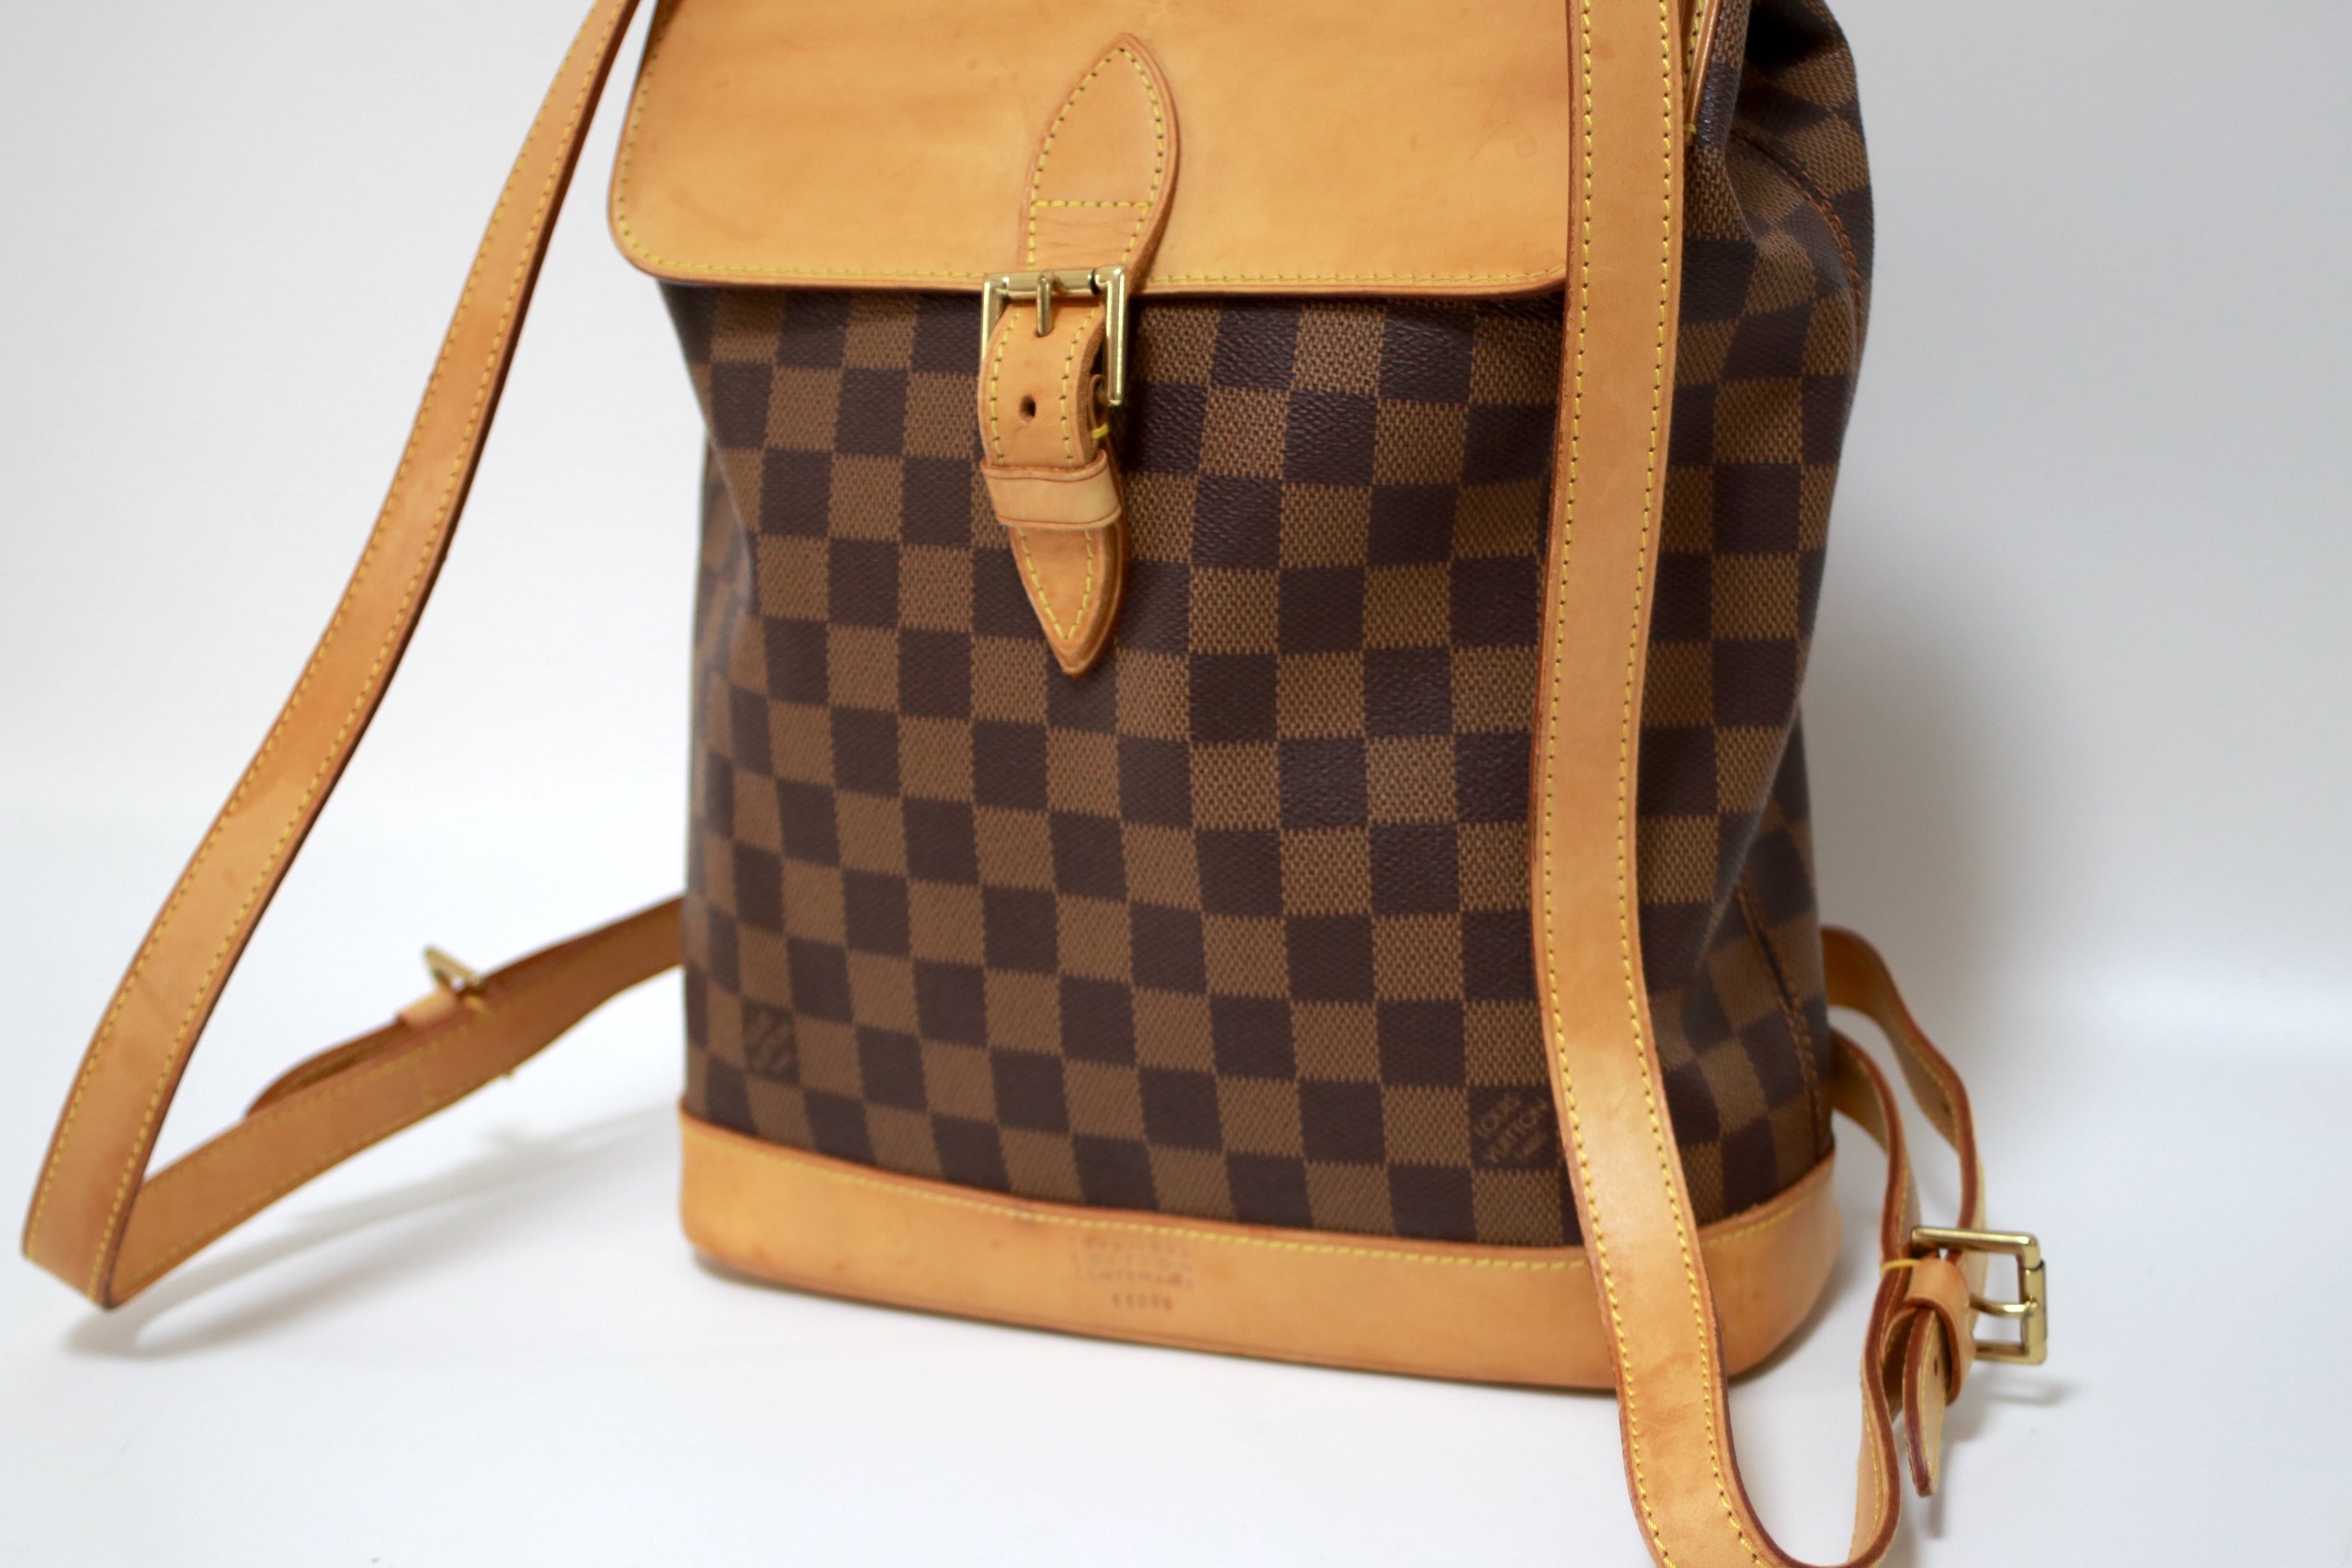 Louis Vuitton Arlequin Centenaire Backpack Used (7485)